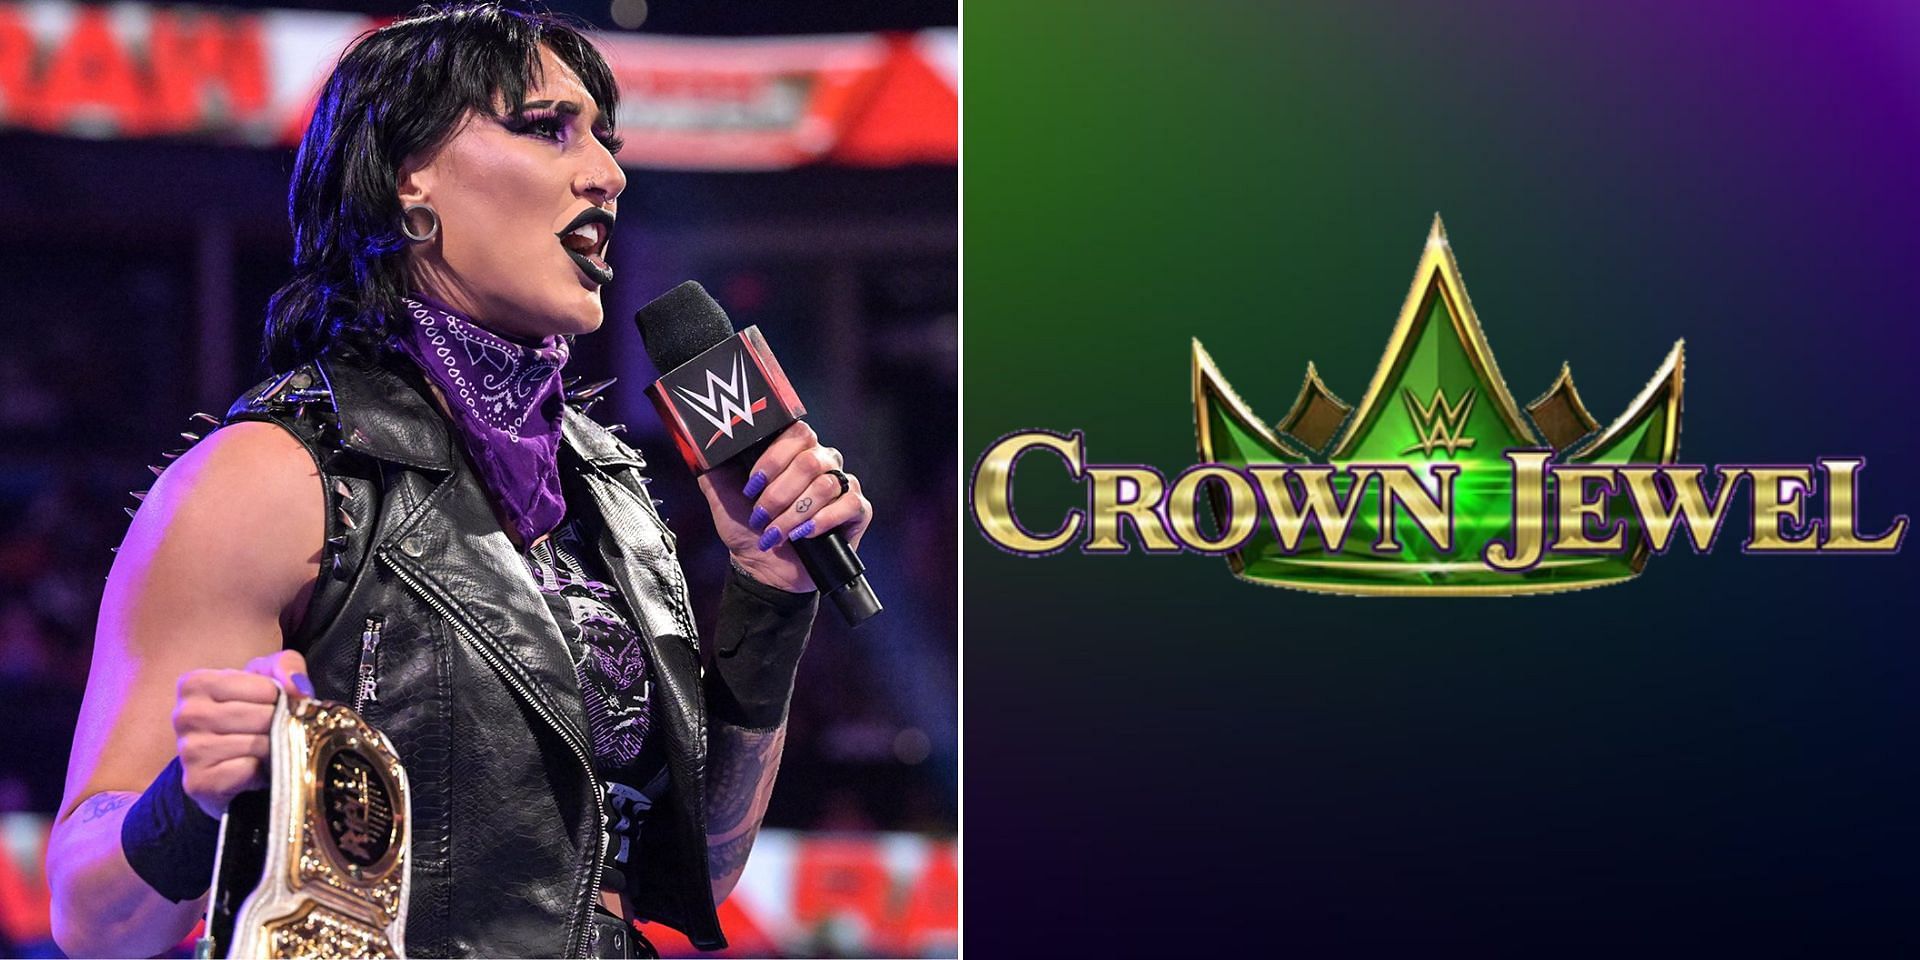 Rhea Ripley will defend her title at WWE Crown Jewel